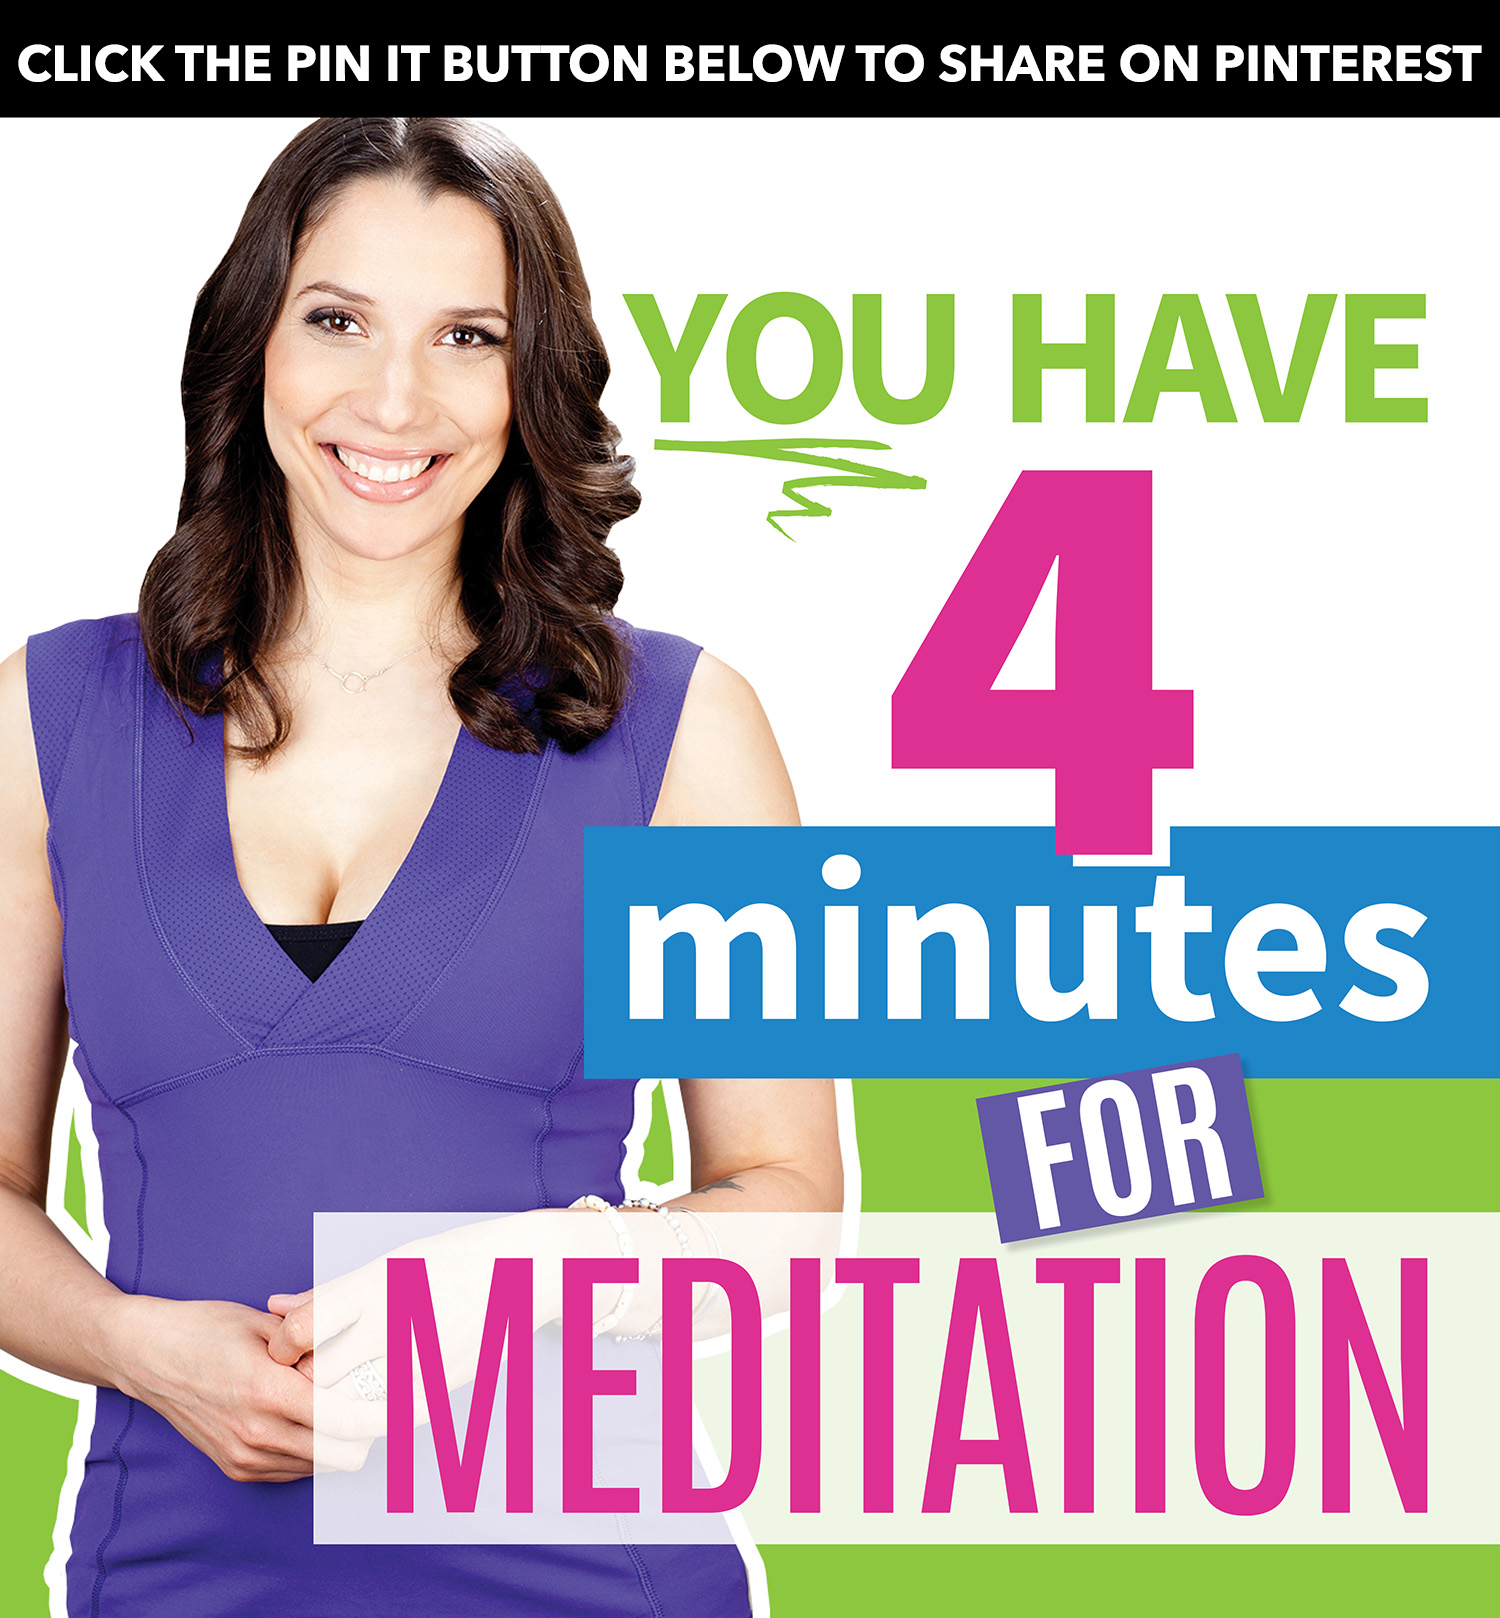 Easy beginner meditations for anxiety, self-esteem, sleep, weight loss, body confidence, and more!